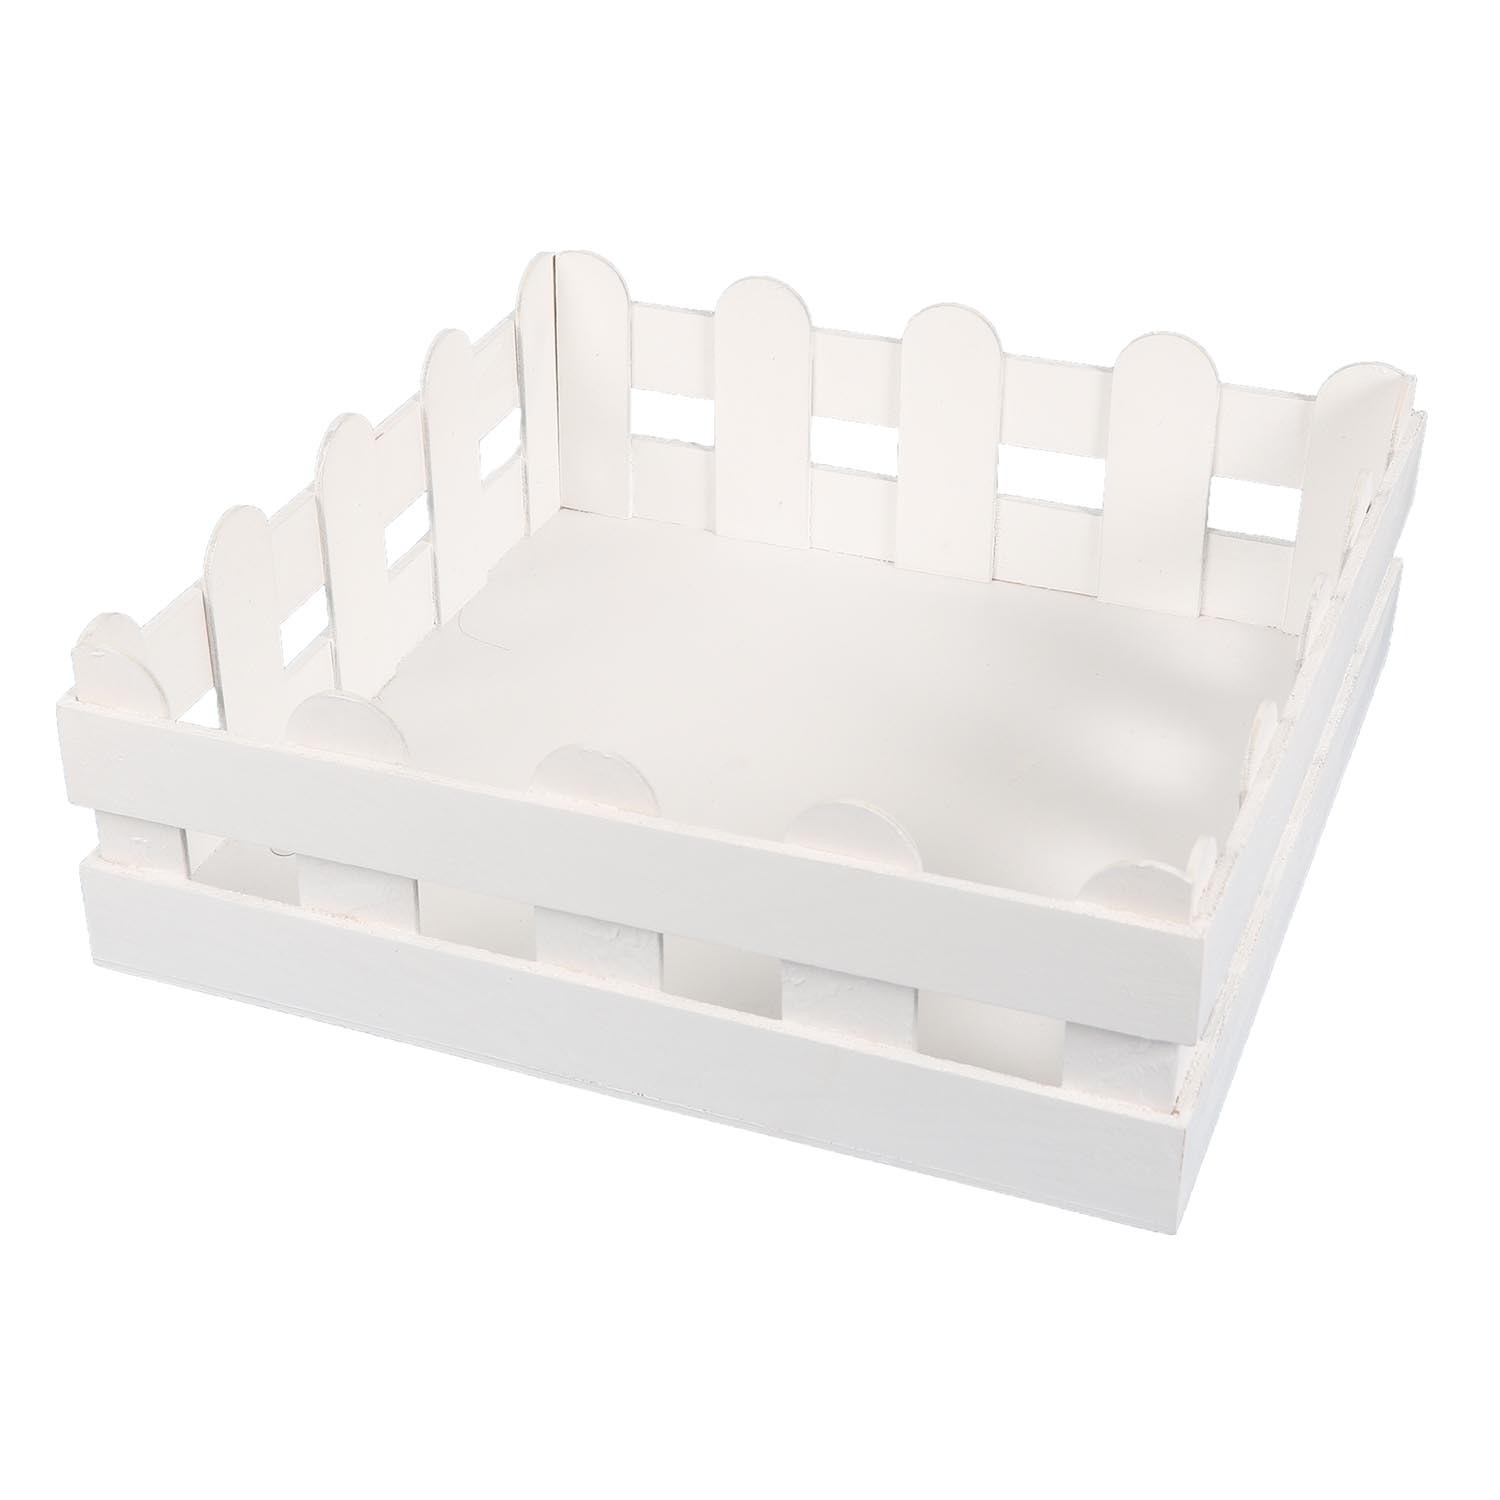 White Wooden Fence Crate - White Image 2